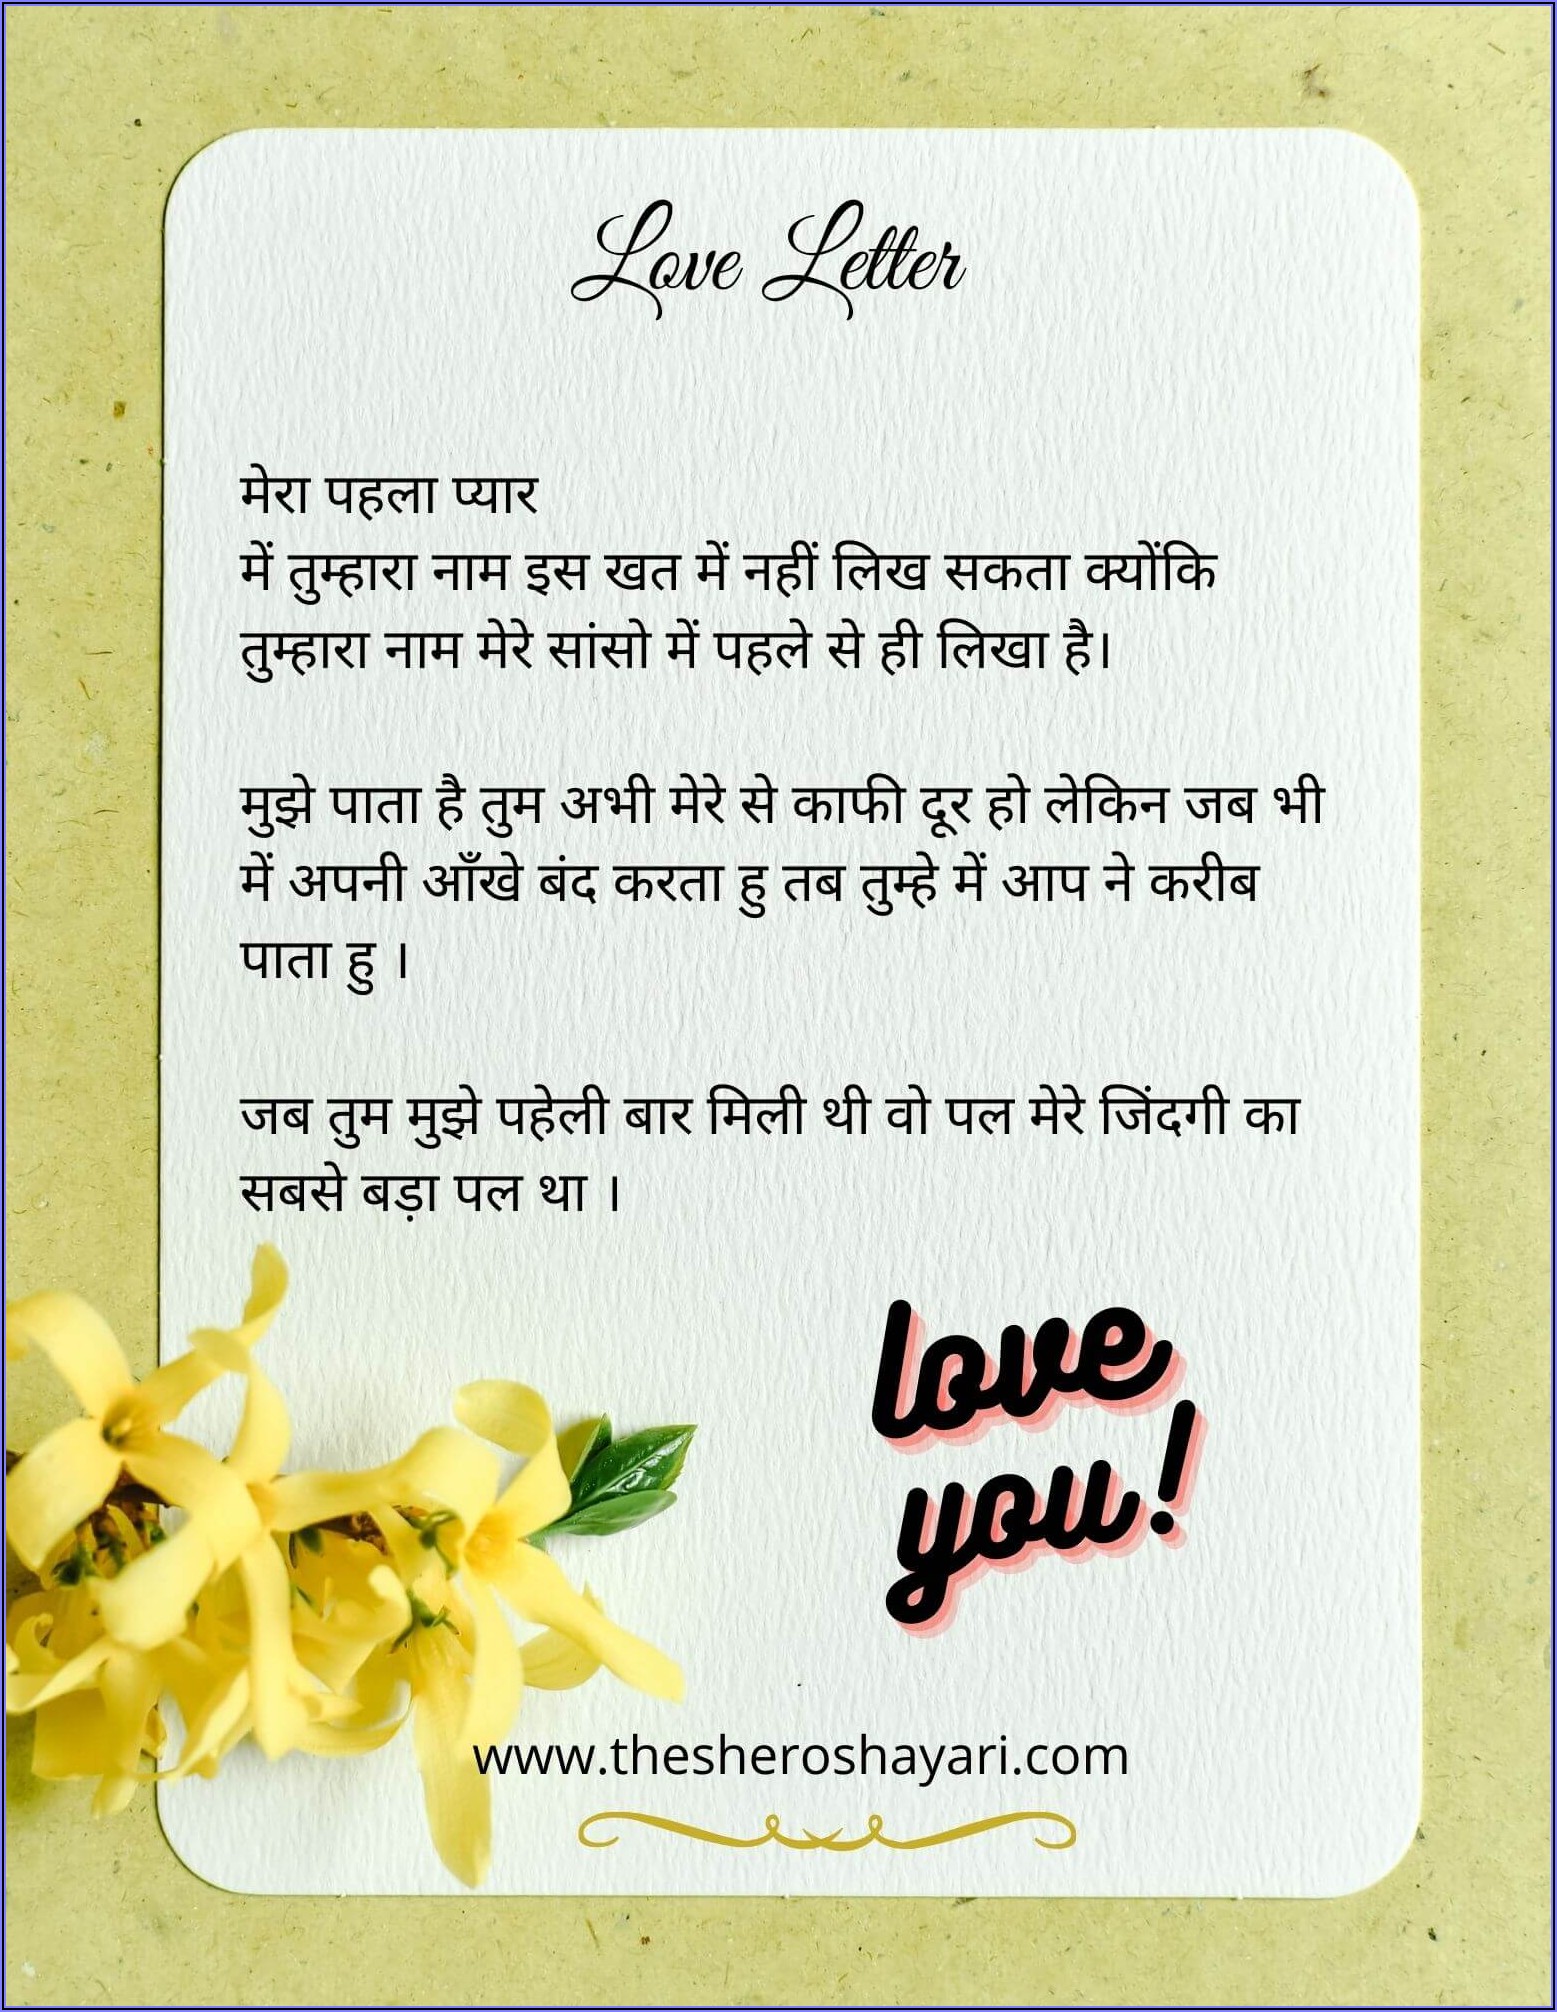 Cute Love Letter For Her In Hindi